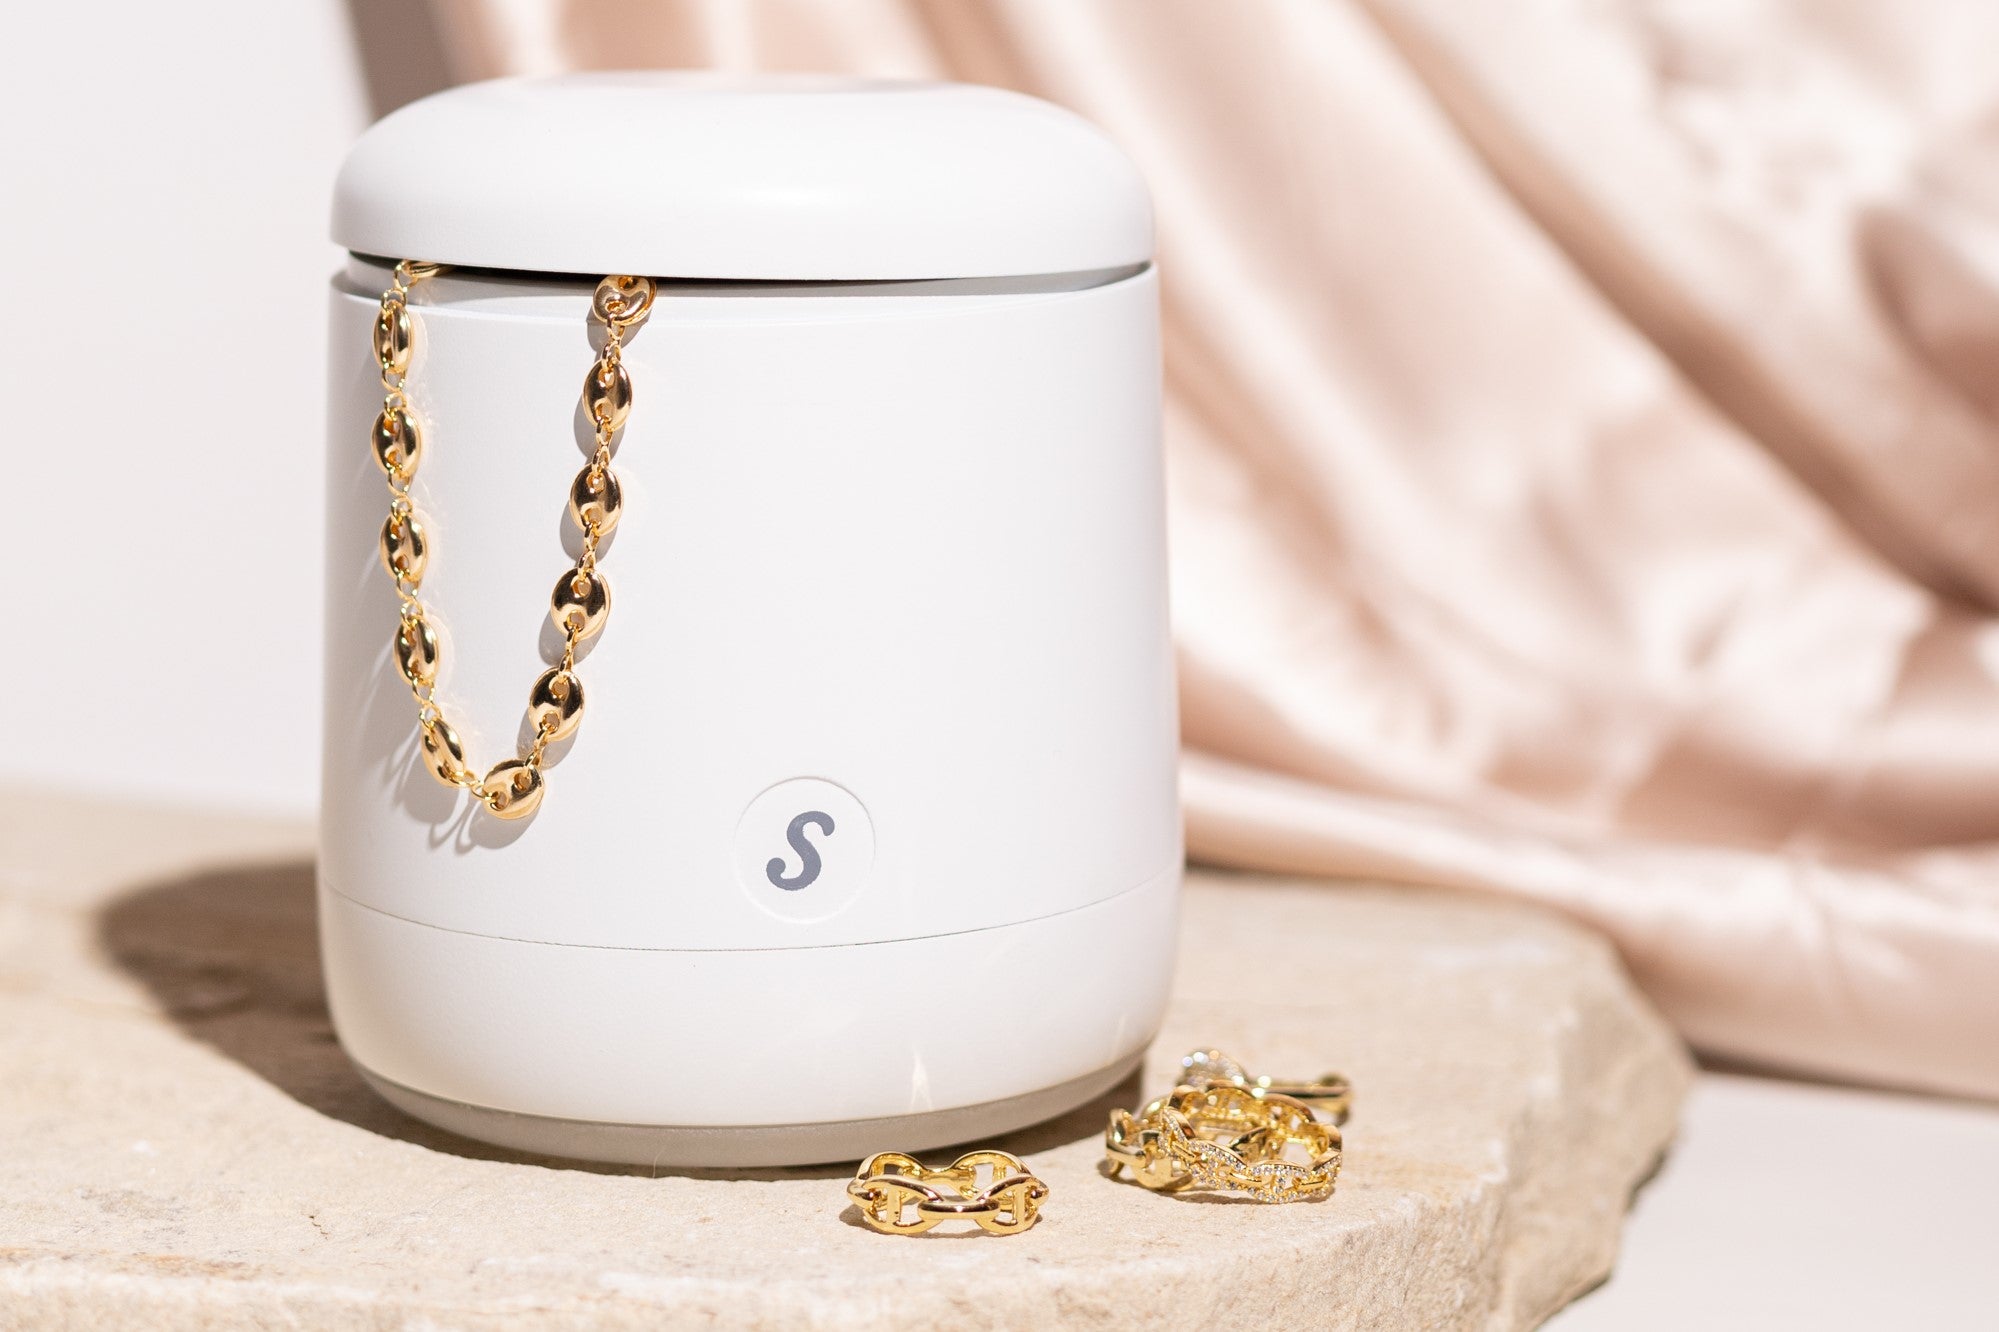 Jewelry Cleaning Solution – Soaq™